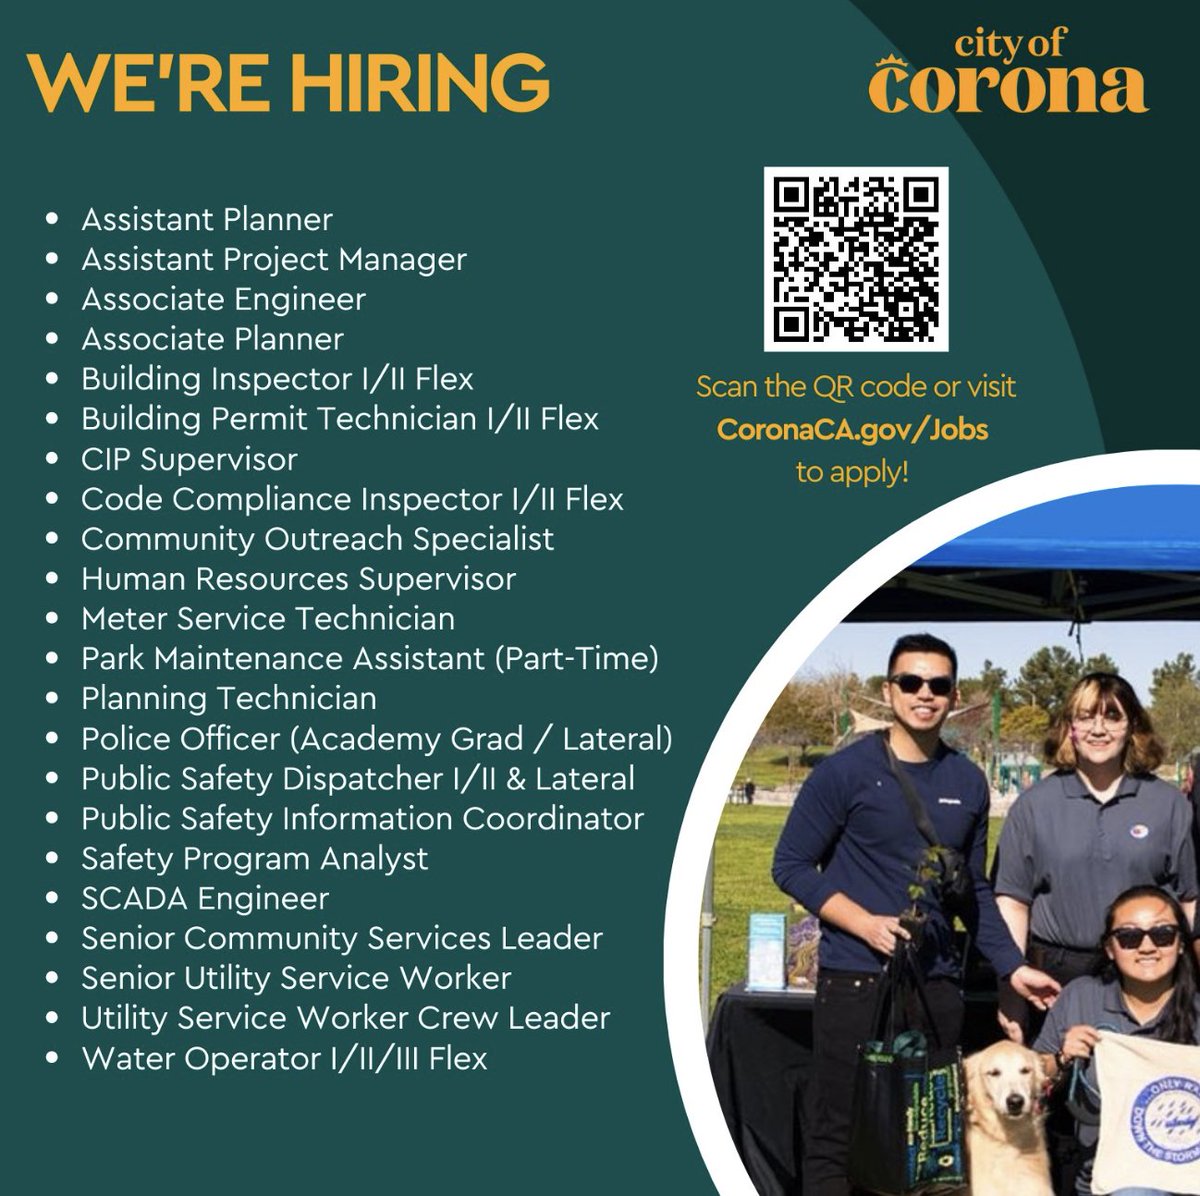 📣 We're hiring! Join the City of Corona! Browse openings and apply online at CoronaCA.gov/Jobs #nowhiring #applynow